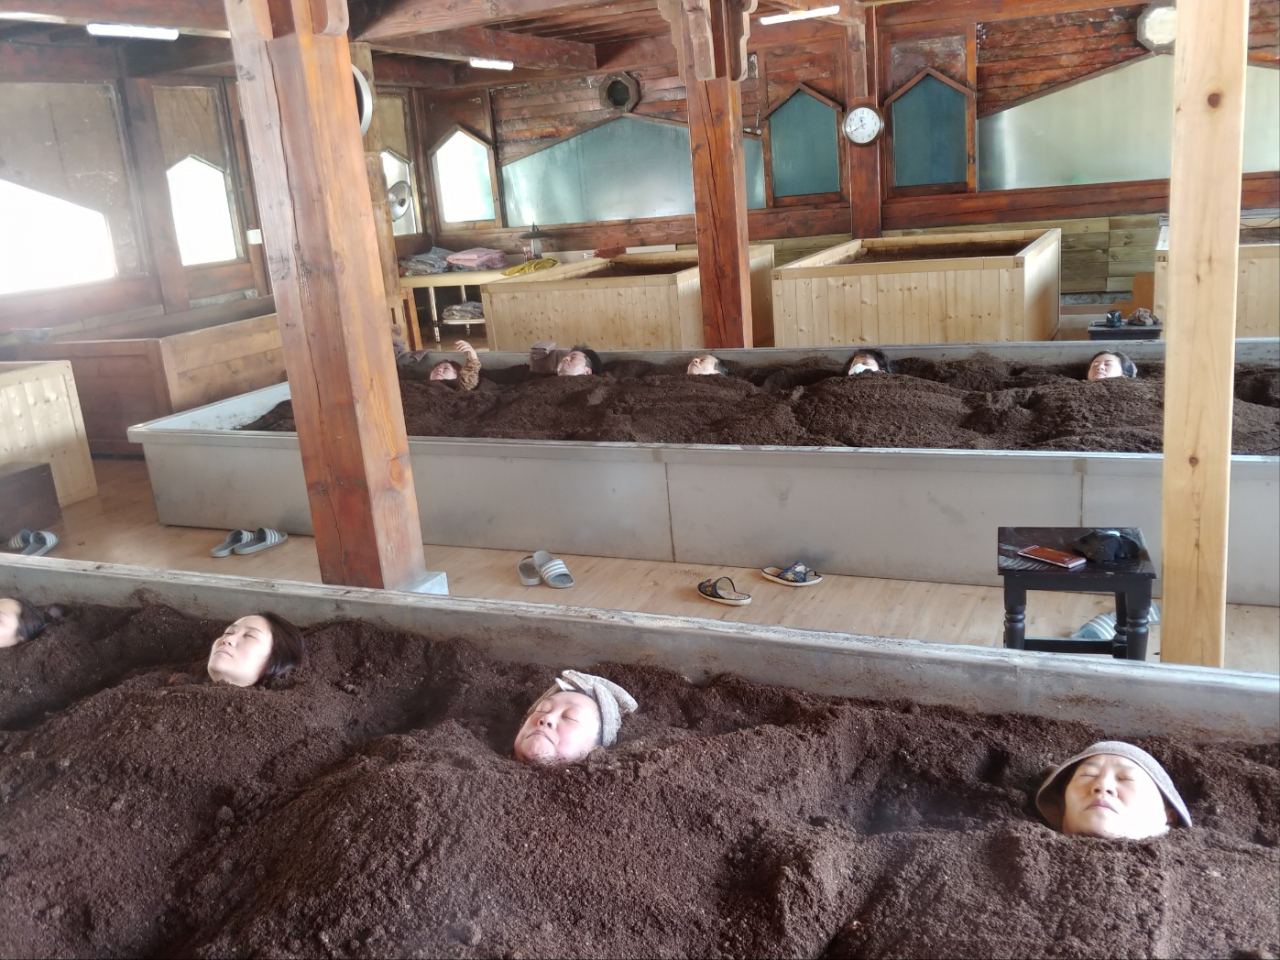 Visitors are covered with heated soil. (Relife Center)